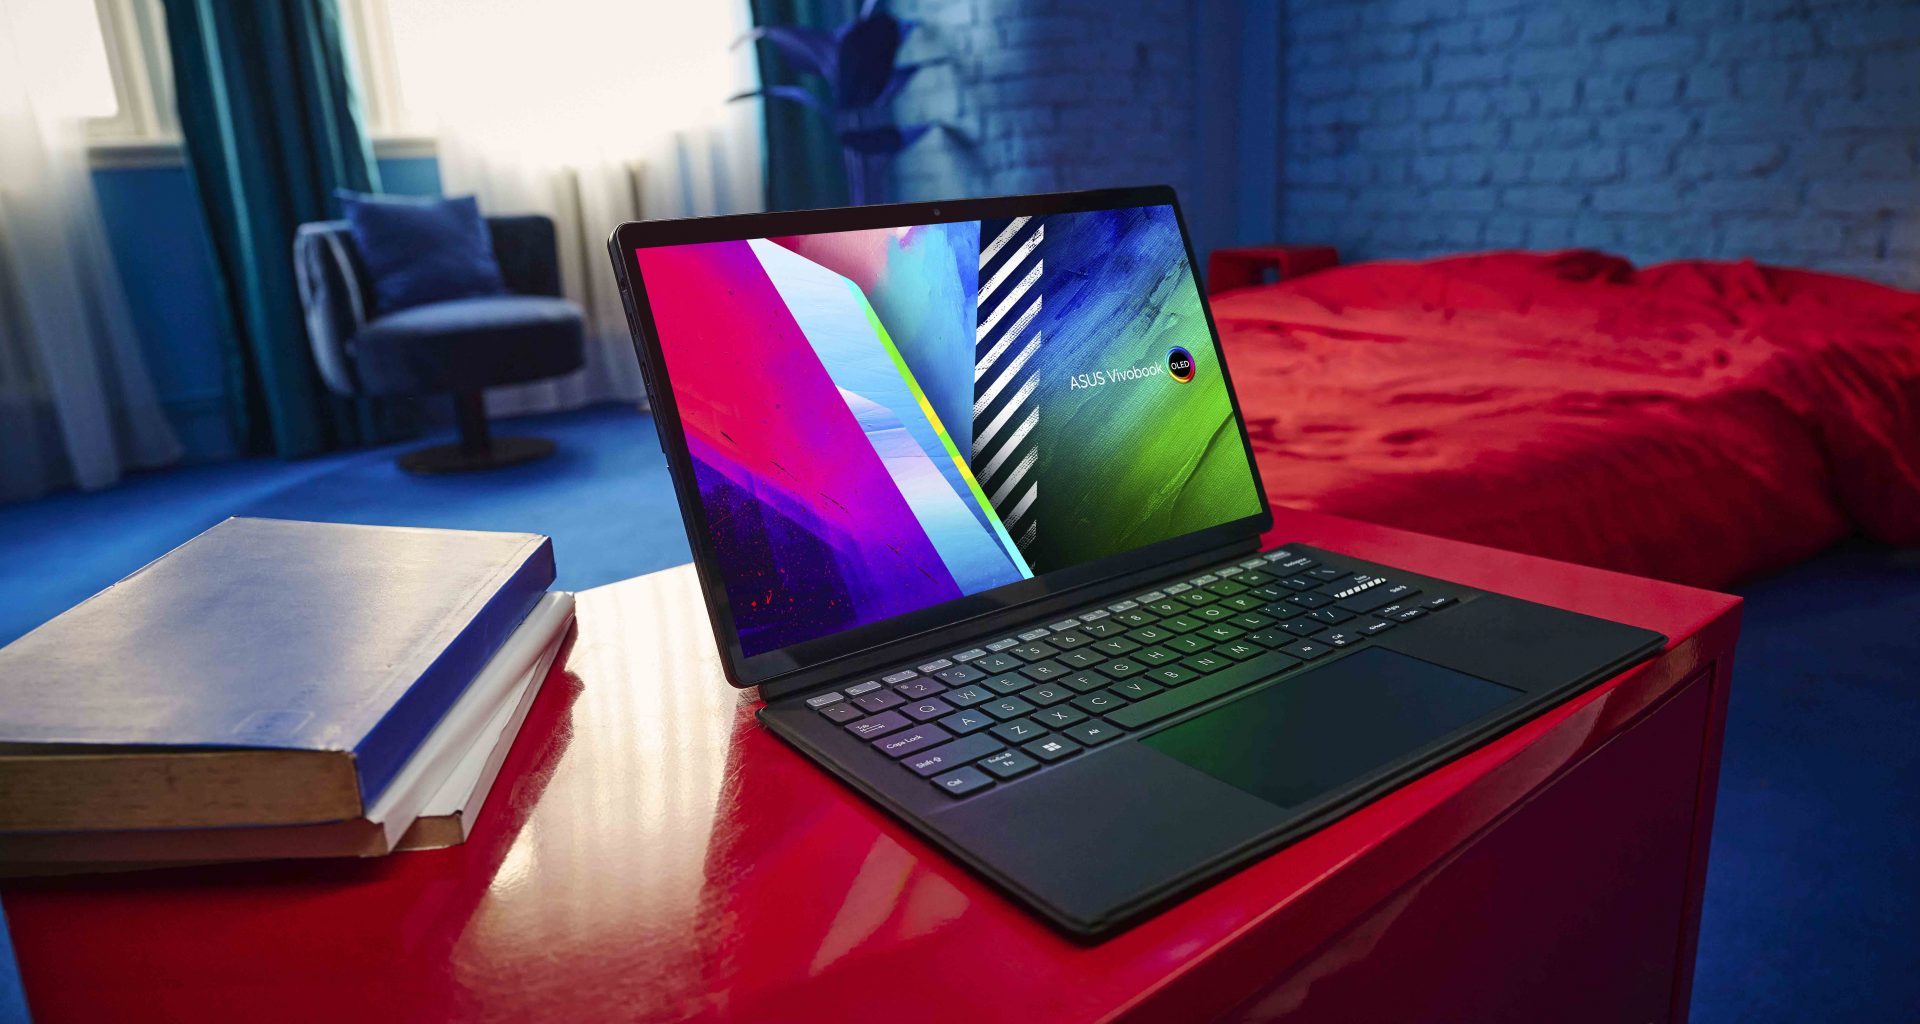 ASUS Vivobook 13 Slate OLED (T3300) - the brand’s first 13.3" OLED Windows detachable laptop that come with FREE 1-month Xbox Game Pass Ultimate - Alvinology